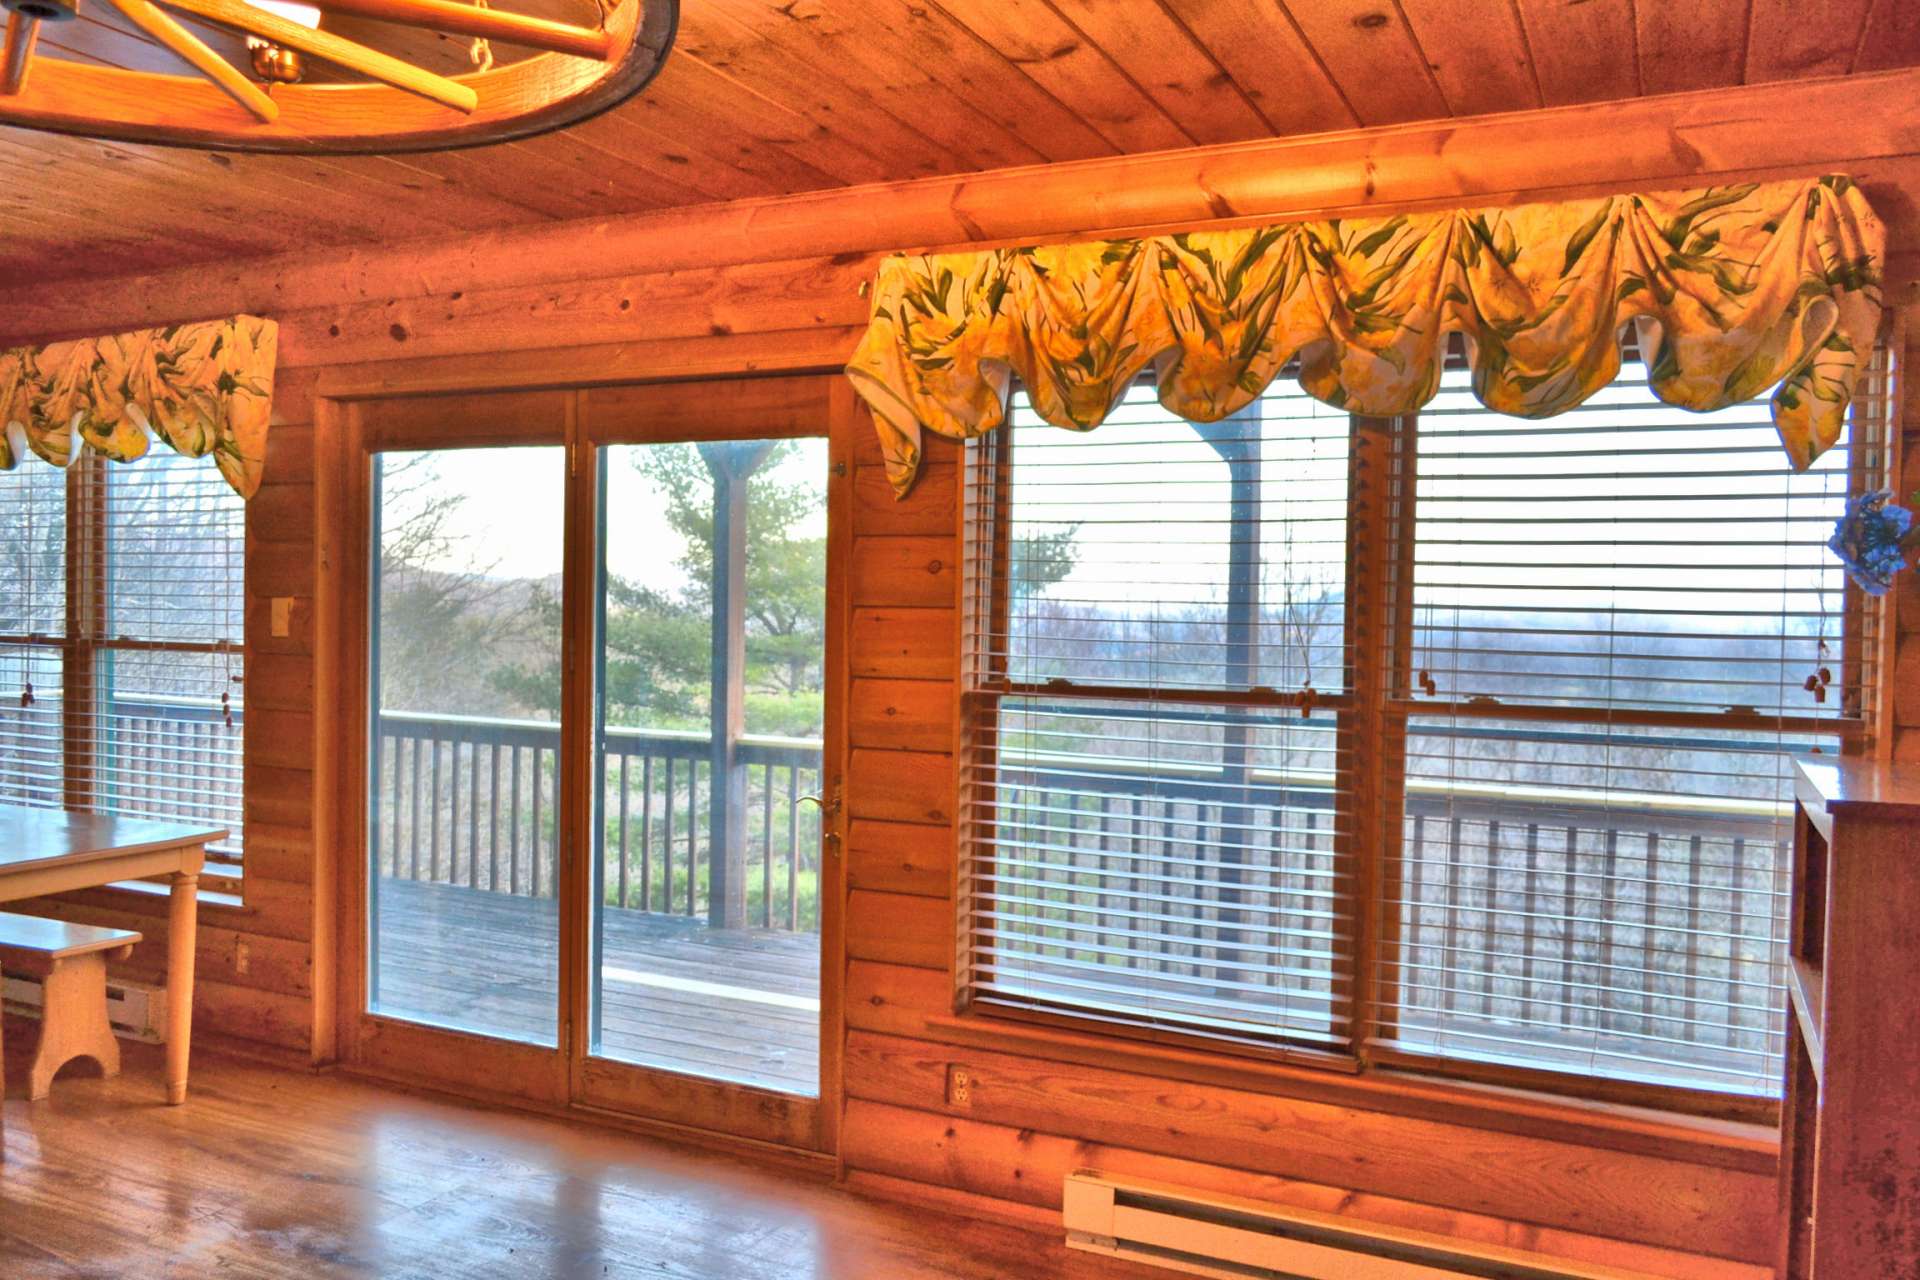 The great room also features easy access to the deck that wraps around 3 sides of the cabin and expands the living space during the warmer months.